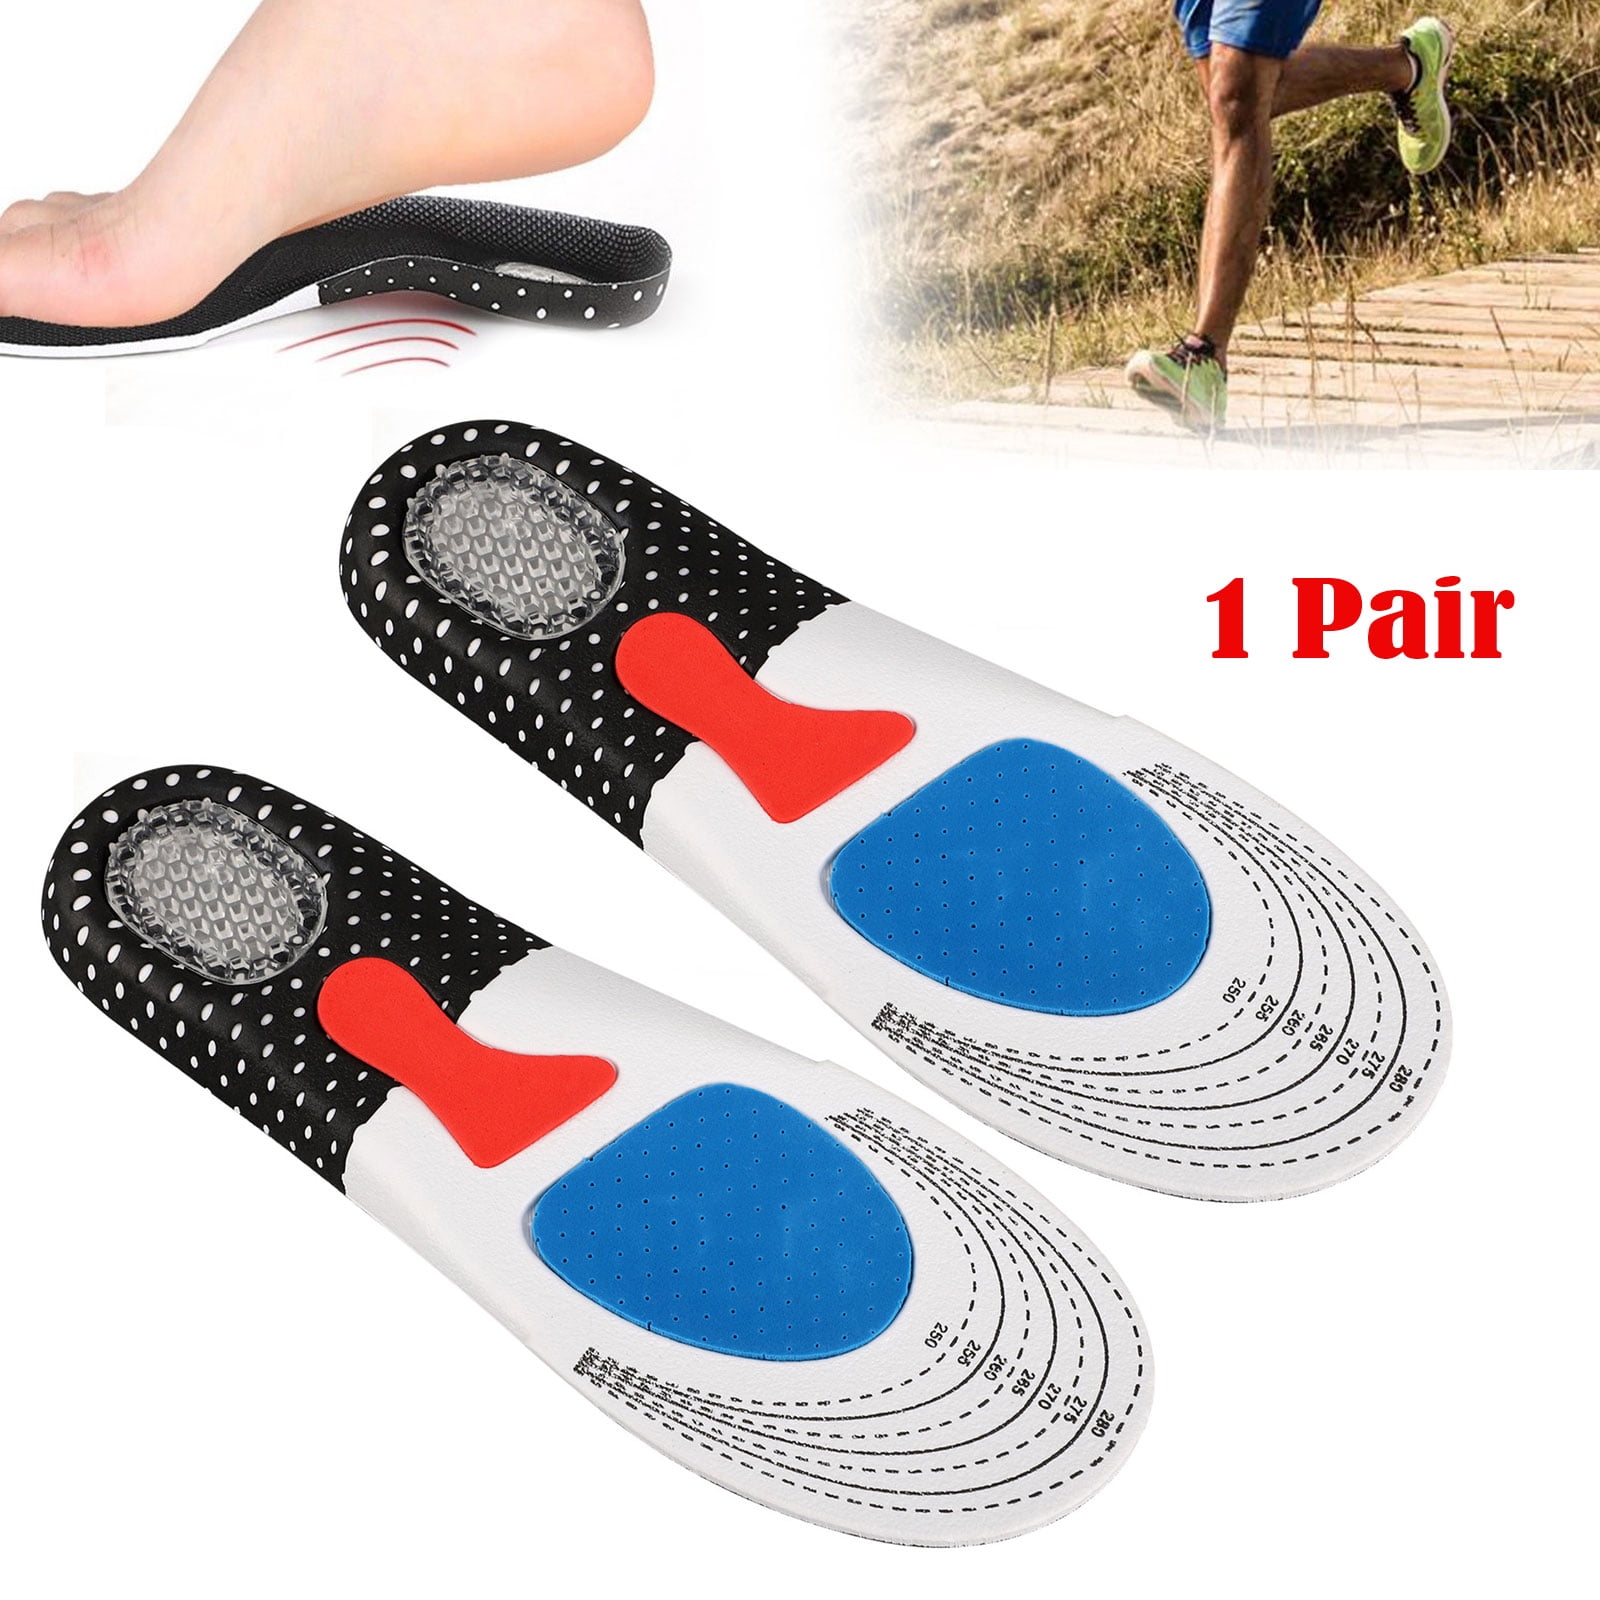 5 Pairs Men Lady Gel Orthotic Insoles Insert Shoe Pad Arch Support Heel Cushion 